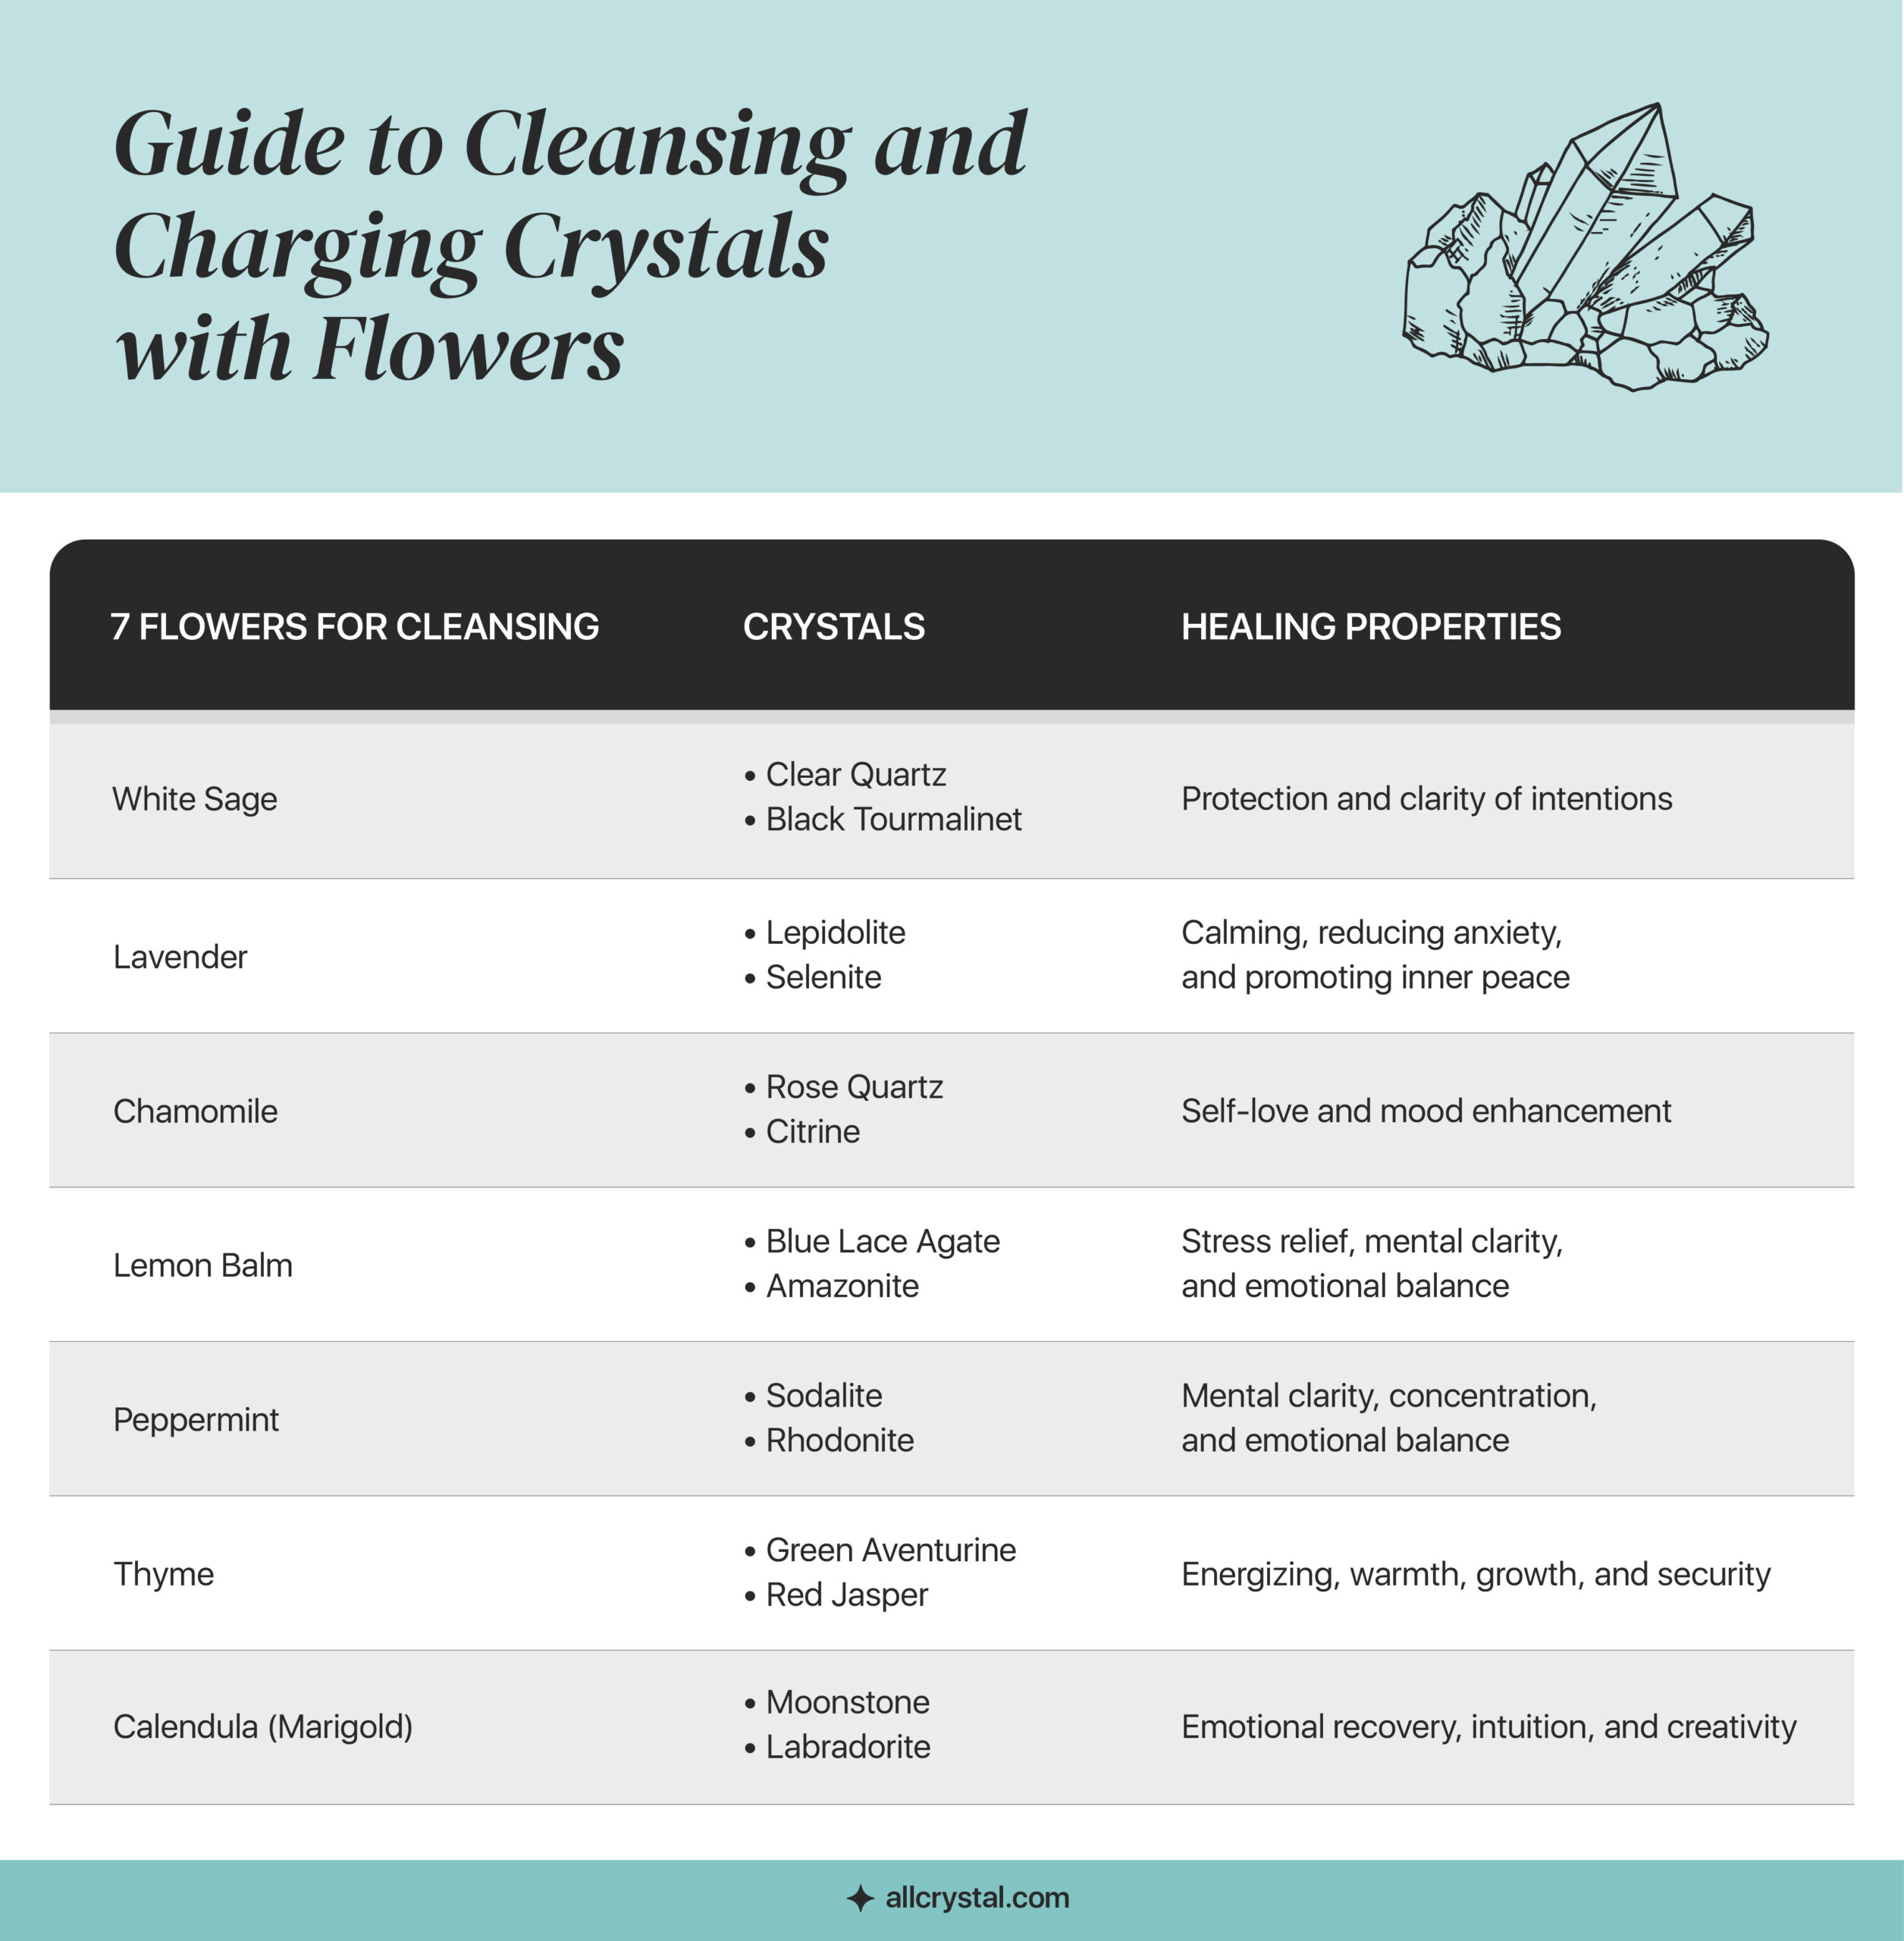 A graphic table containing information about Guide to Cleansing Crystals with Flowers